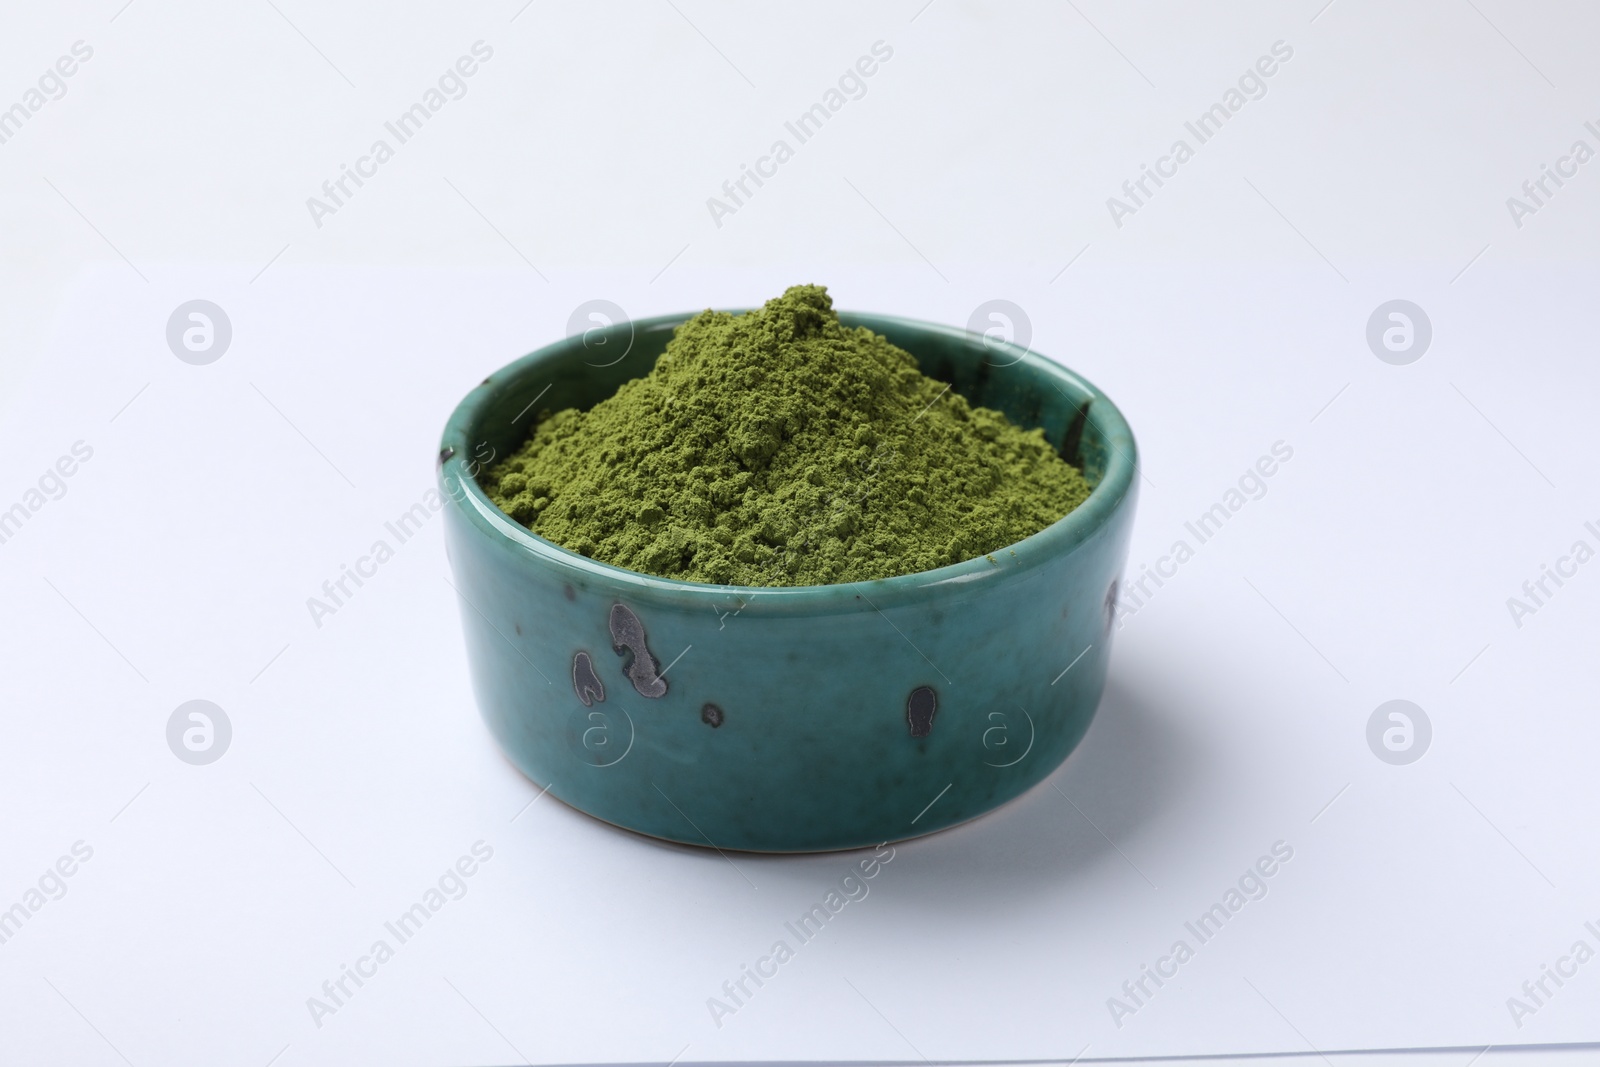 Photo of Green matcha powder in bowl isolated on white